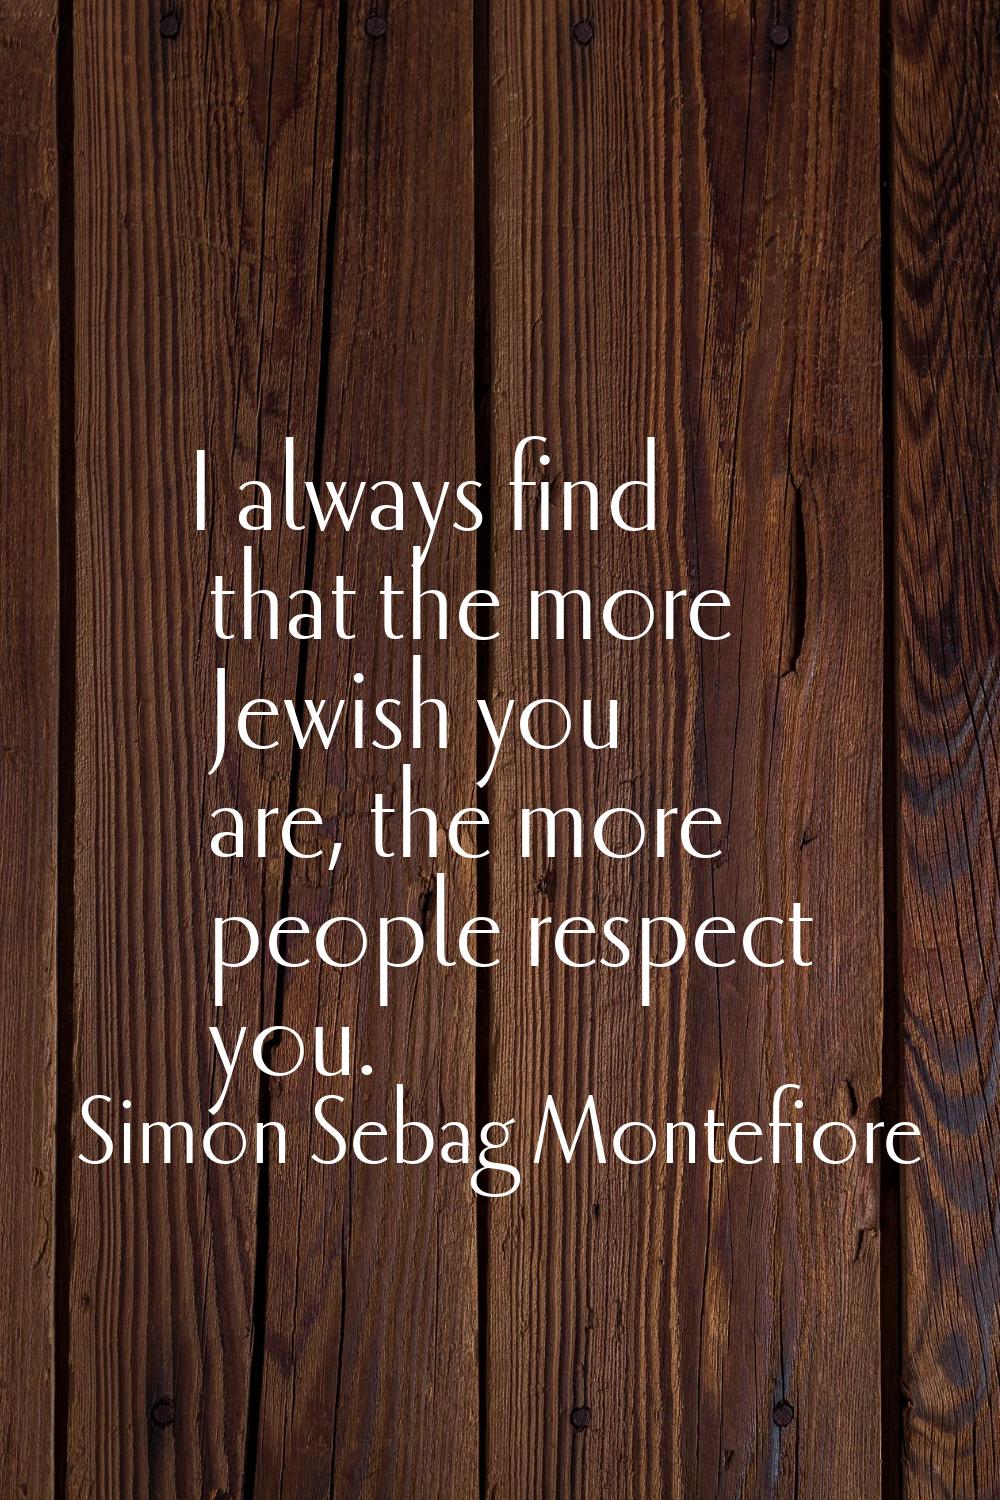 I always find that the more Jewish you are, the more people respect you.